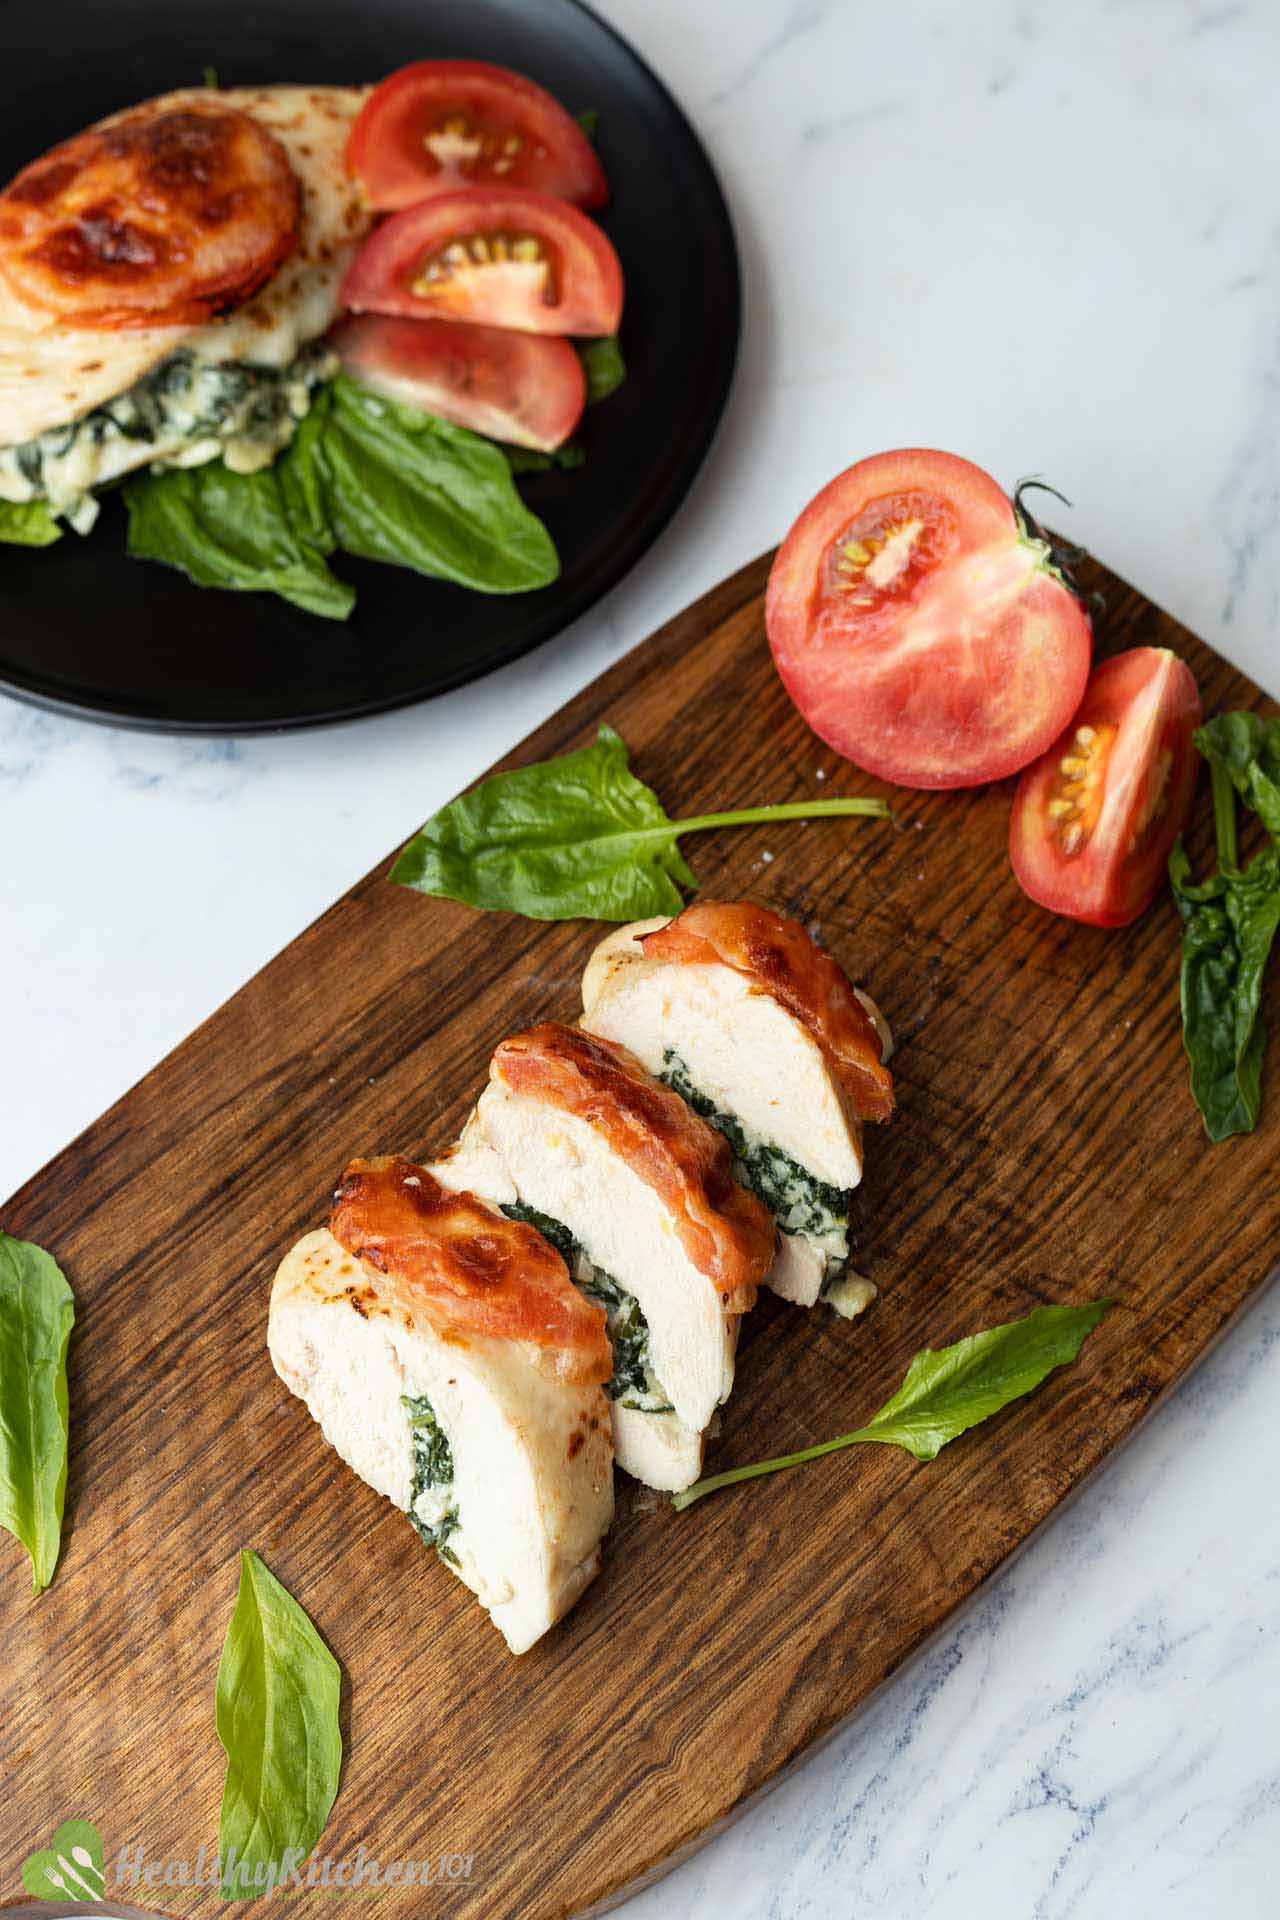 Spinach Stuffed Chicken Breast Recipe - The Guilt-Free Meat and Cheese